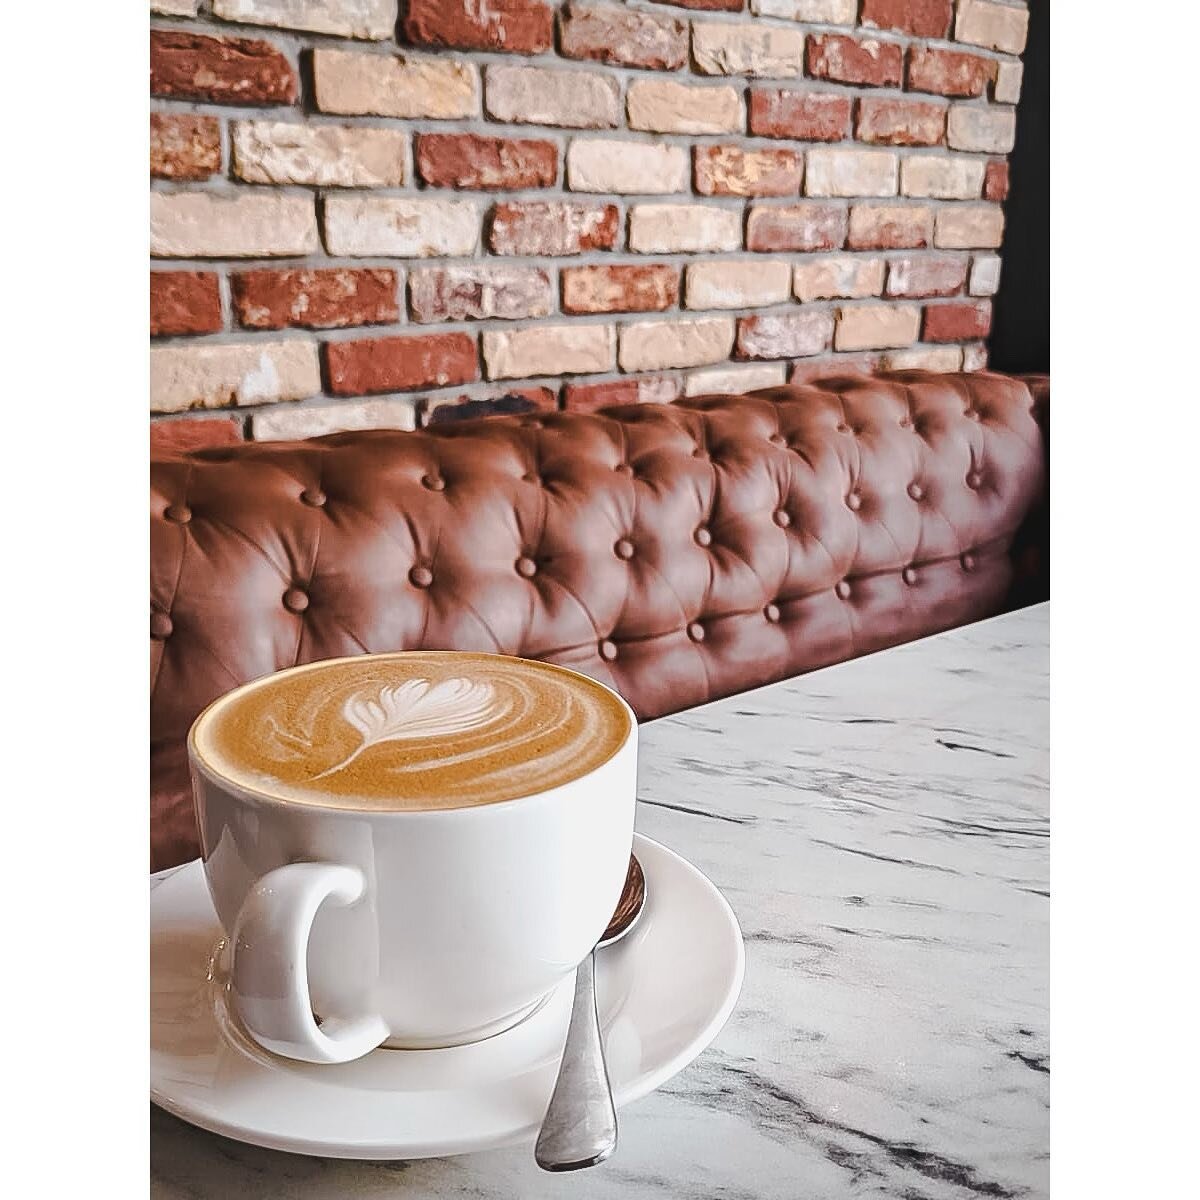 It&rsquo;s pumpkin spice season baby. 
.
The weather may have turned but pull up a chair, we&rsquo;ve got just the thing ☕️